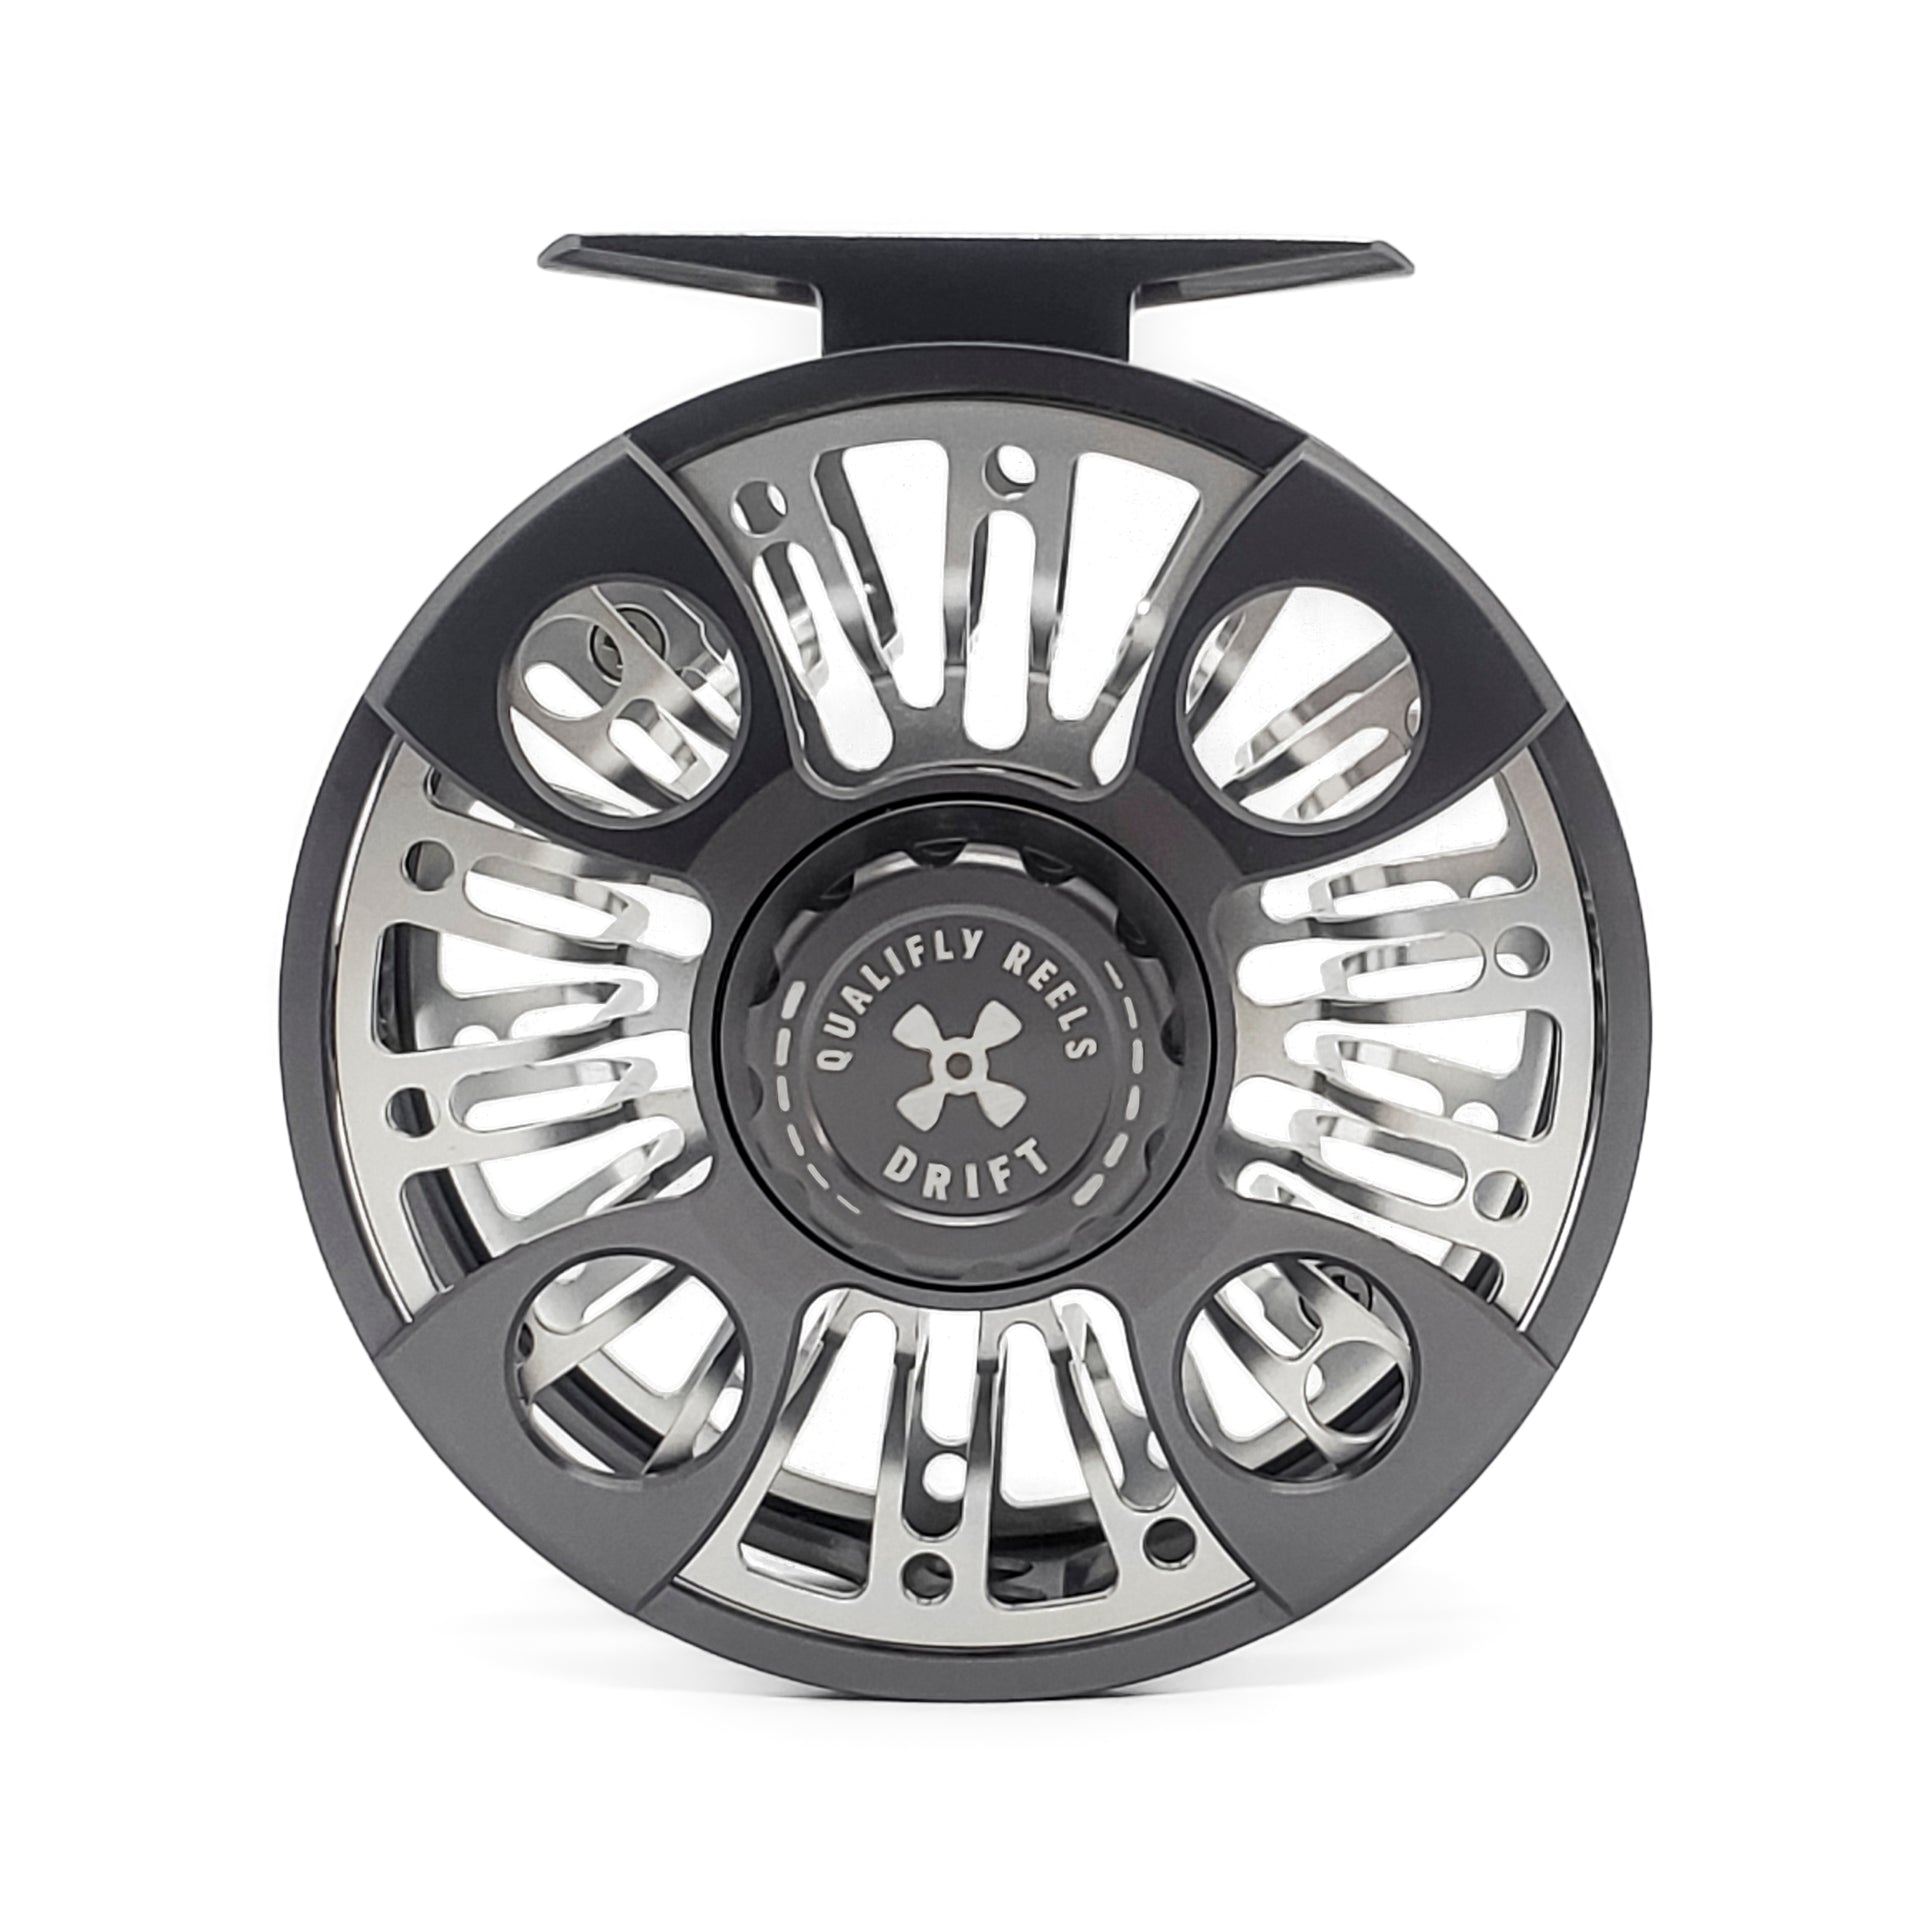 QualitChoice Fly Fishing Reel Aluminum Hand-changed Portable Spinning Wheel Fish  Tackle Saltwater Lake Reels Professional Learner Type 1 Type 1 